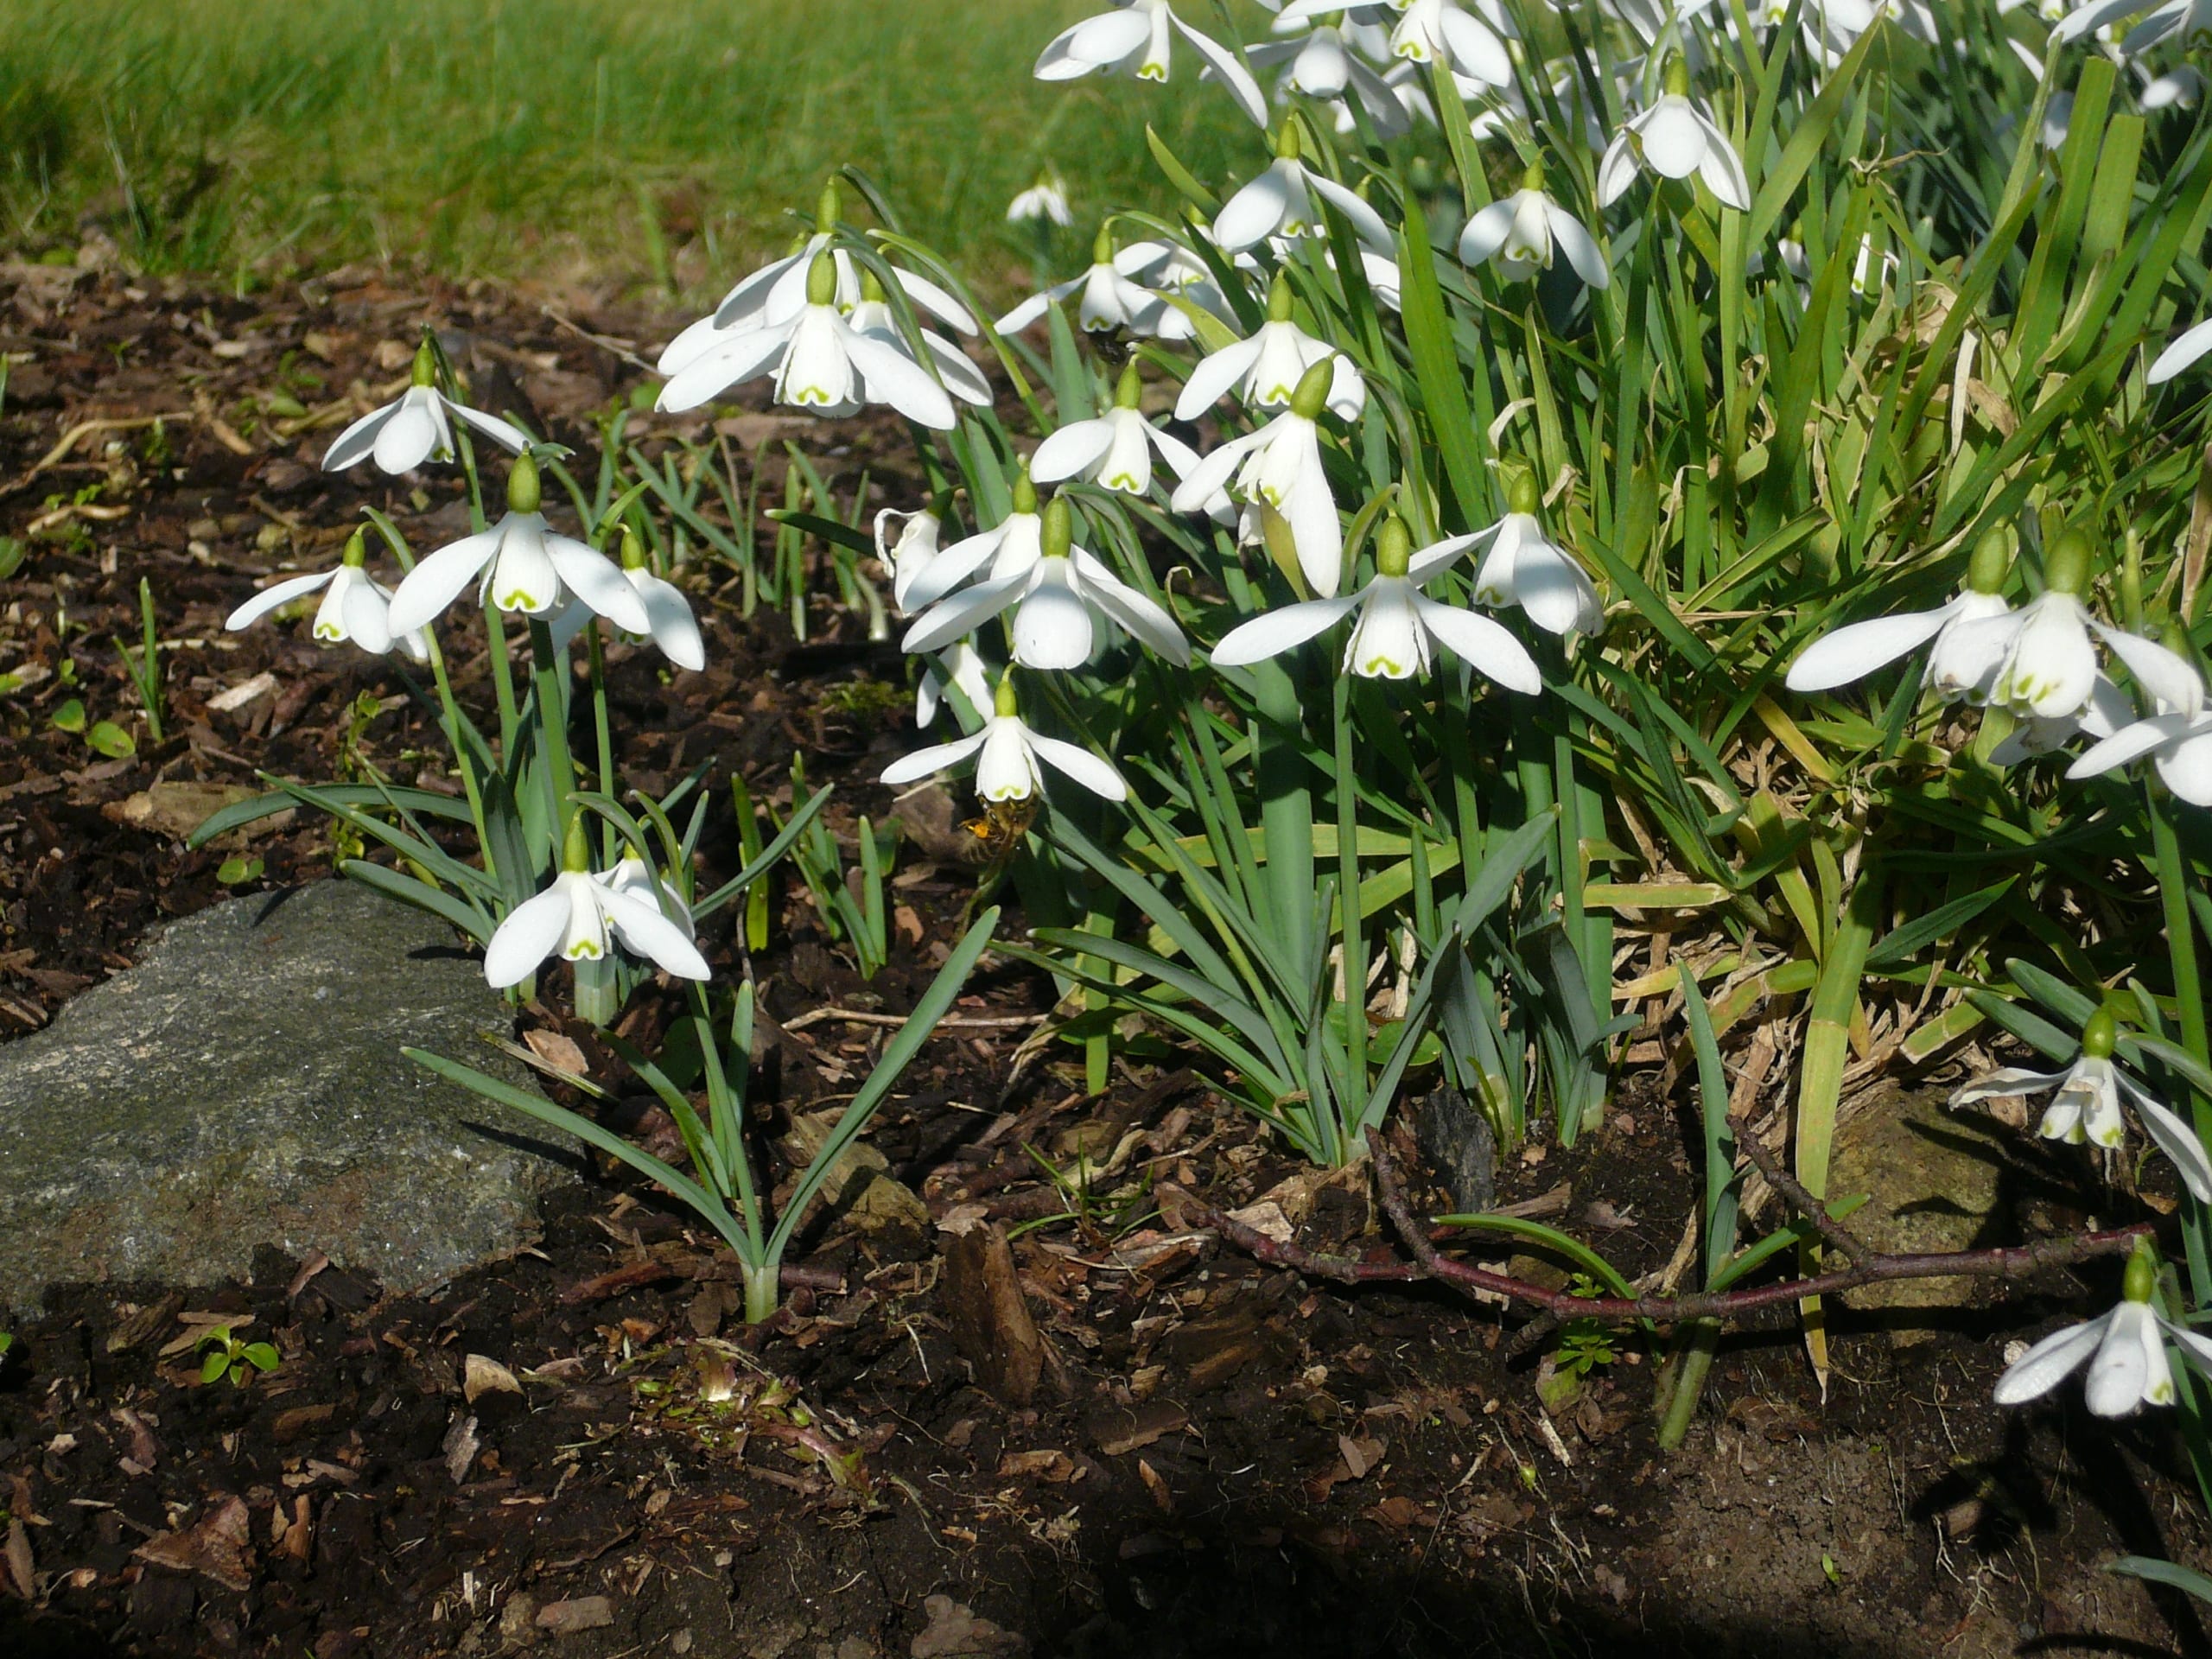 A group of snowdrops